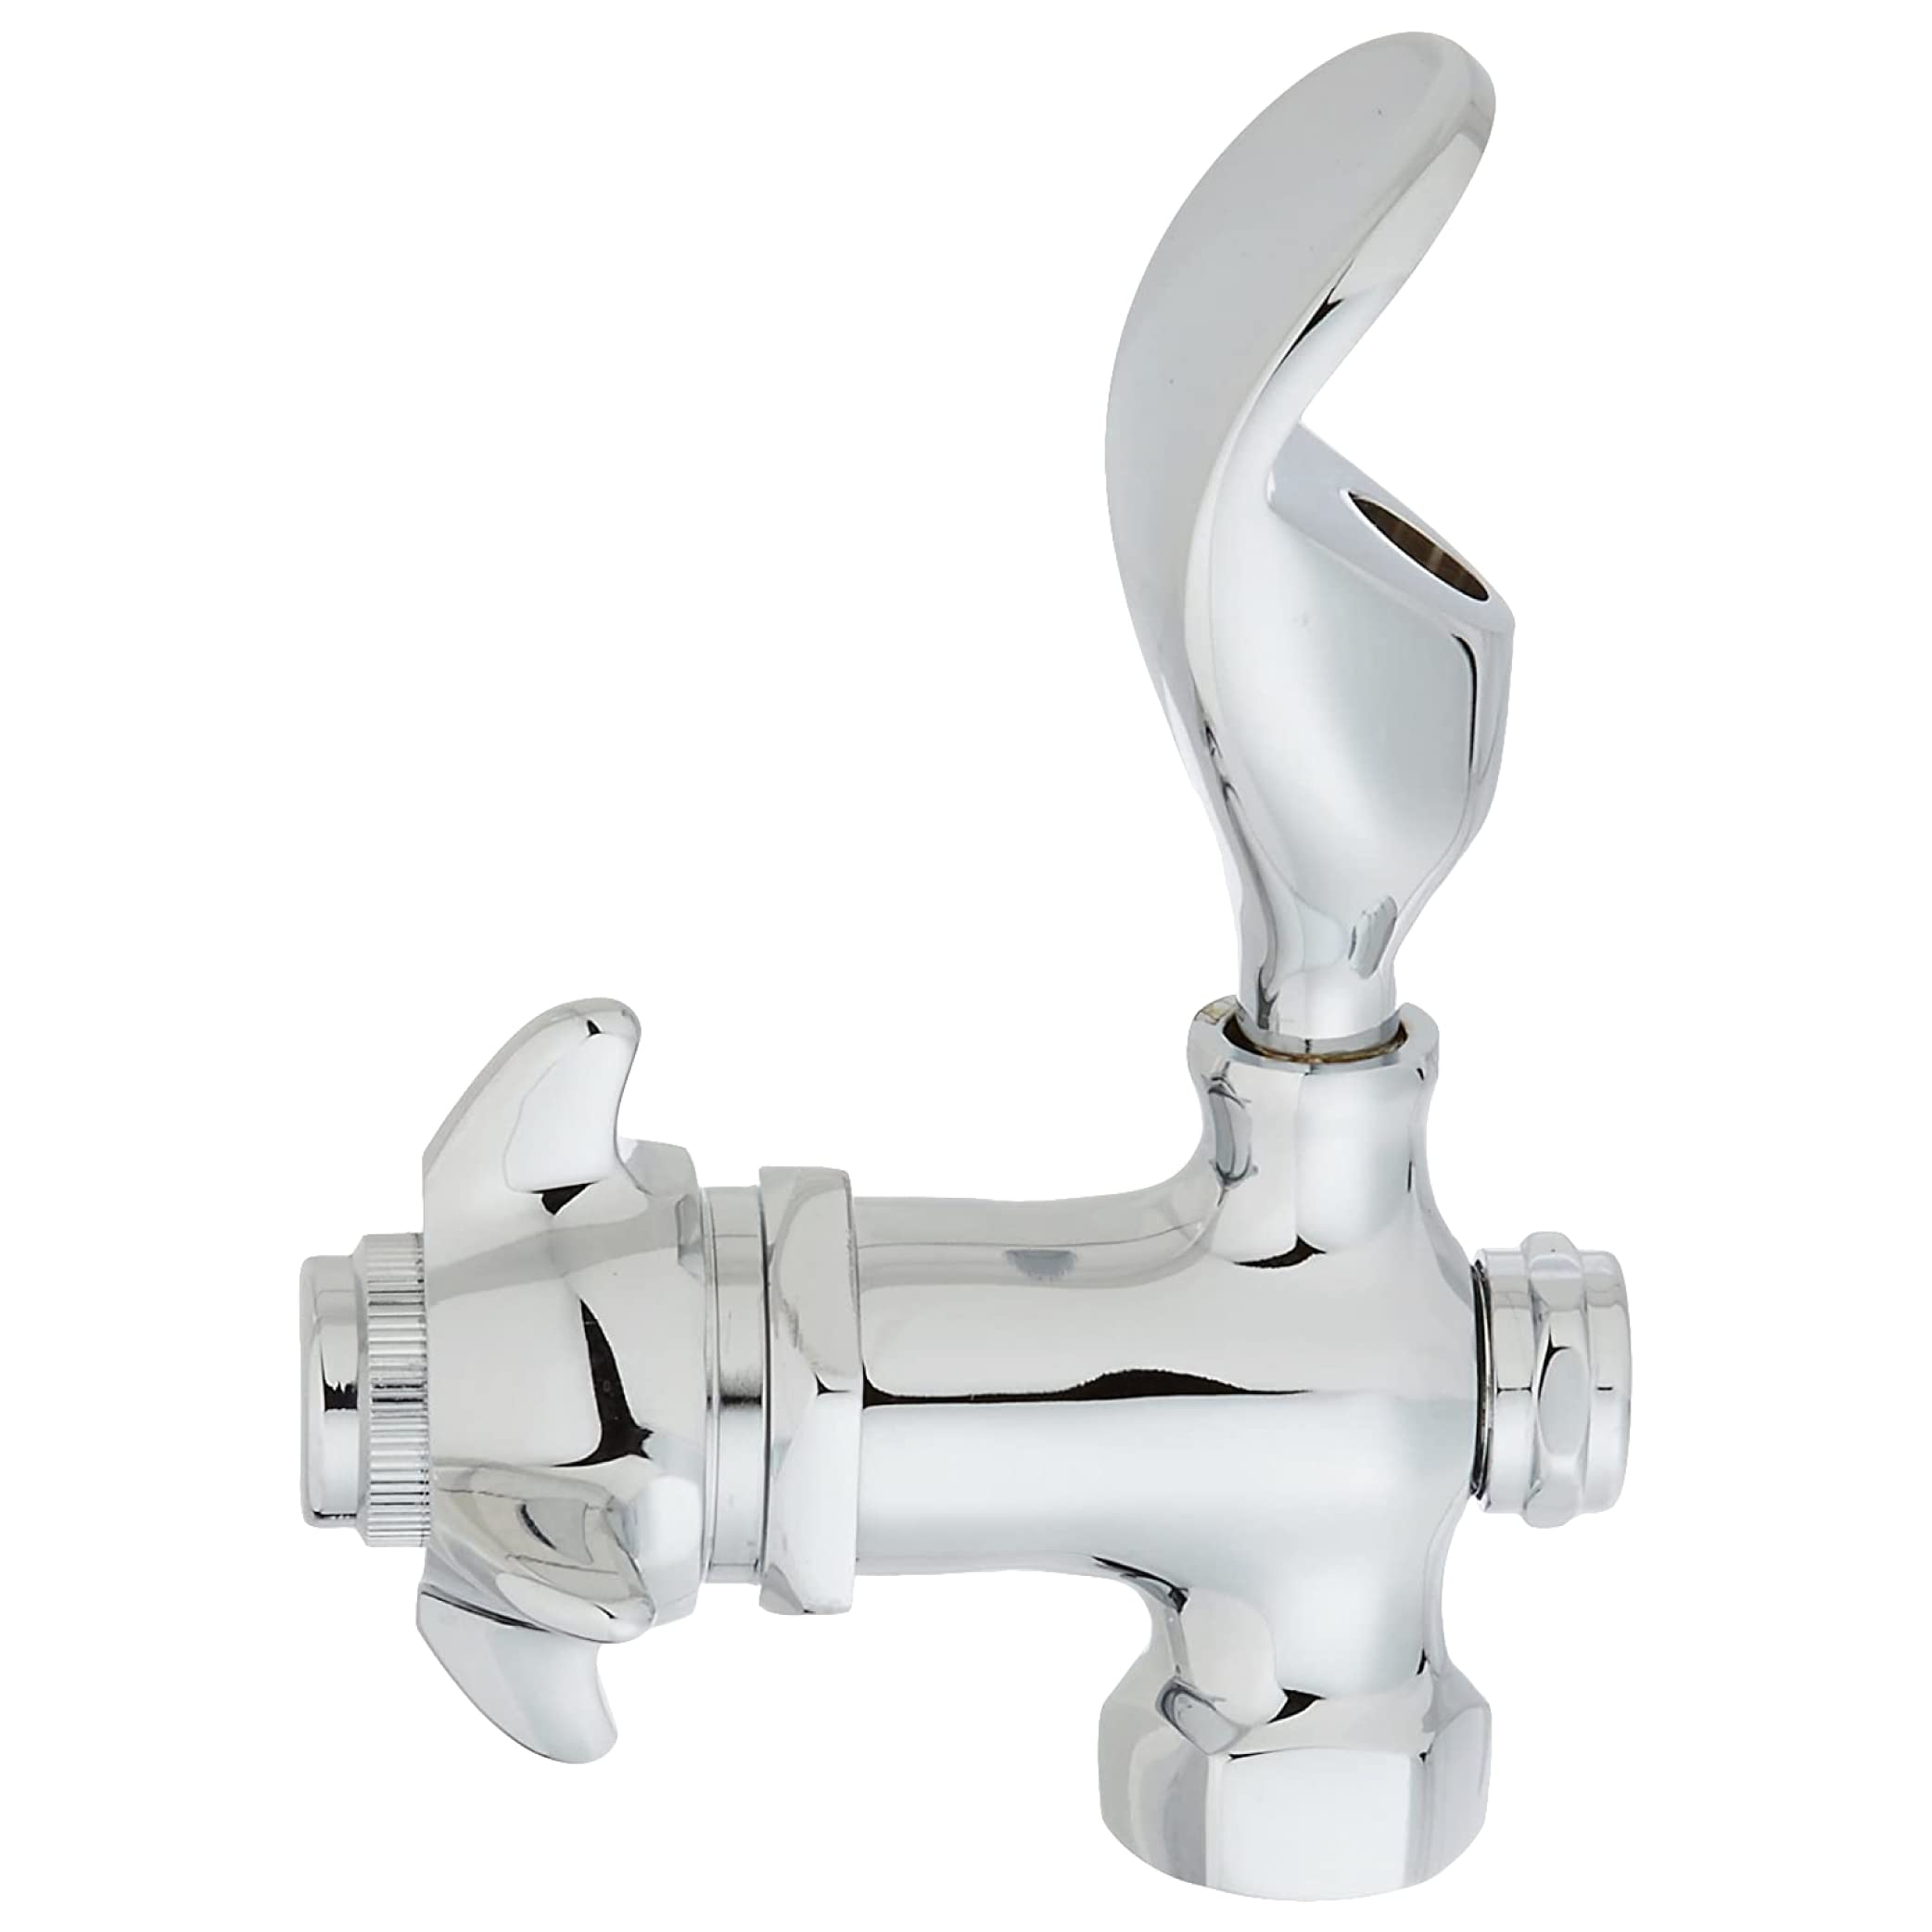 Homewerks Worldwide 3310-150-CH-B-Z Water Drinking Fountain Faucet 1/2" FPT WTR Bubbler, No Size, Chrome